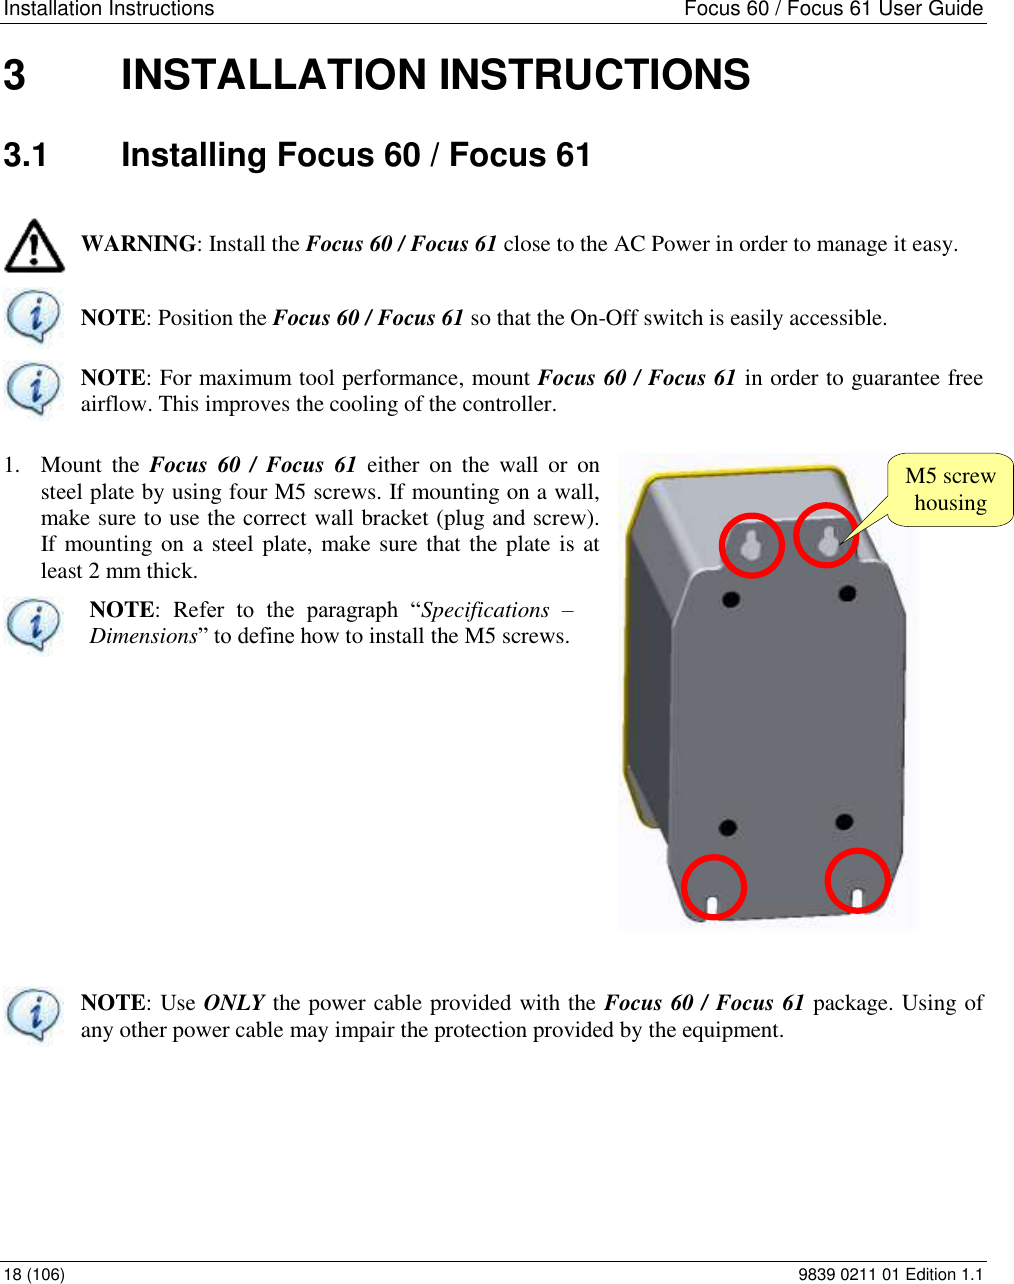 Installation Instructions  Focus 60 / Focus 61 User Guide 18 (106)  9839 0211 01 Edition 1.1 3  INSTALLATION INSTRUCTIONS 3.1  Installing Focus 60 / Focus 61  WARNING: Install the Focus 60 / Focus 61 close to the AC Power in order to manage it easy.  NOTE: Position the Focus 60 / Focus 61 so that the On-Off switch is easily accessible.  NOTE: For maximum tool performance, mount Focus 60 / Focus 61 in order to guarantee free airflow. This improves the cooling of the controller. 1. Mount  the  Focus  60 /  Focus 61  either  on  the  wall  or  on steel plate by using four M5 screws. If mounting on a wall, make sure to use the correct wall bracket (plug and screw). If mounting on a steel plate, make sure that the plate is at least 2 mm thick.  NOTE:  Refer  to  the  paragraph  “Specifications  – Dimensions” to define how to install the M5 screws.          NOTE: Use ONLY the power cable provided with the Focus 60 / Focus 61 package. Using of any other power cable may impair the protection provided by the equipment.     M5 screw housing 